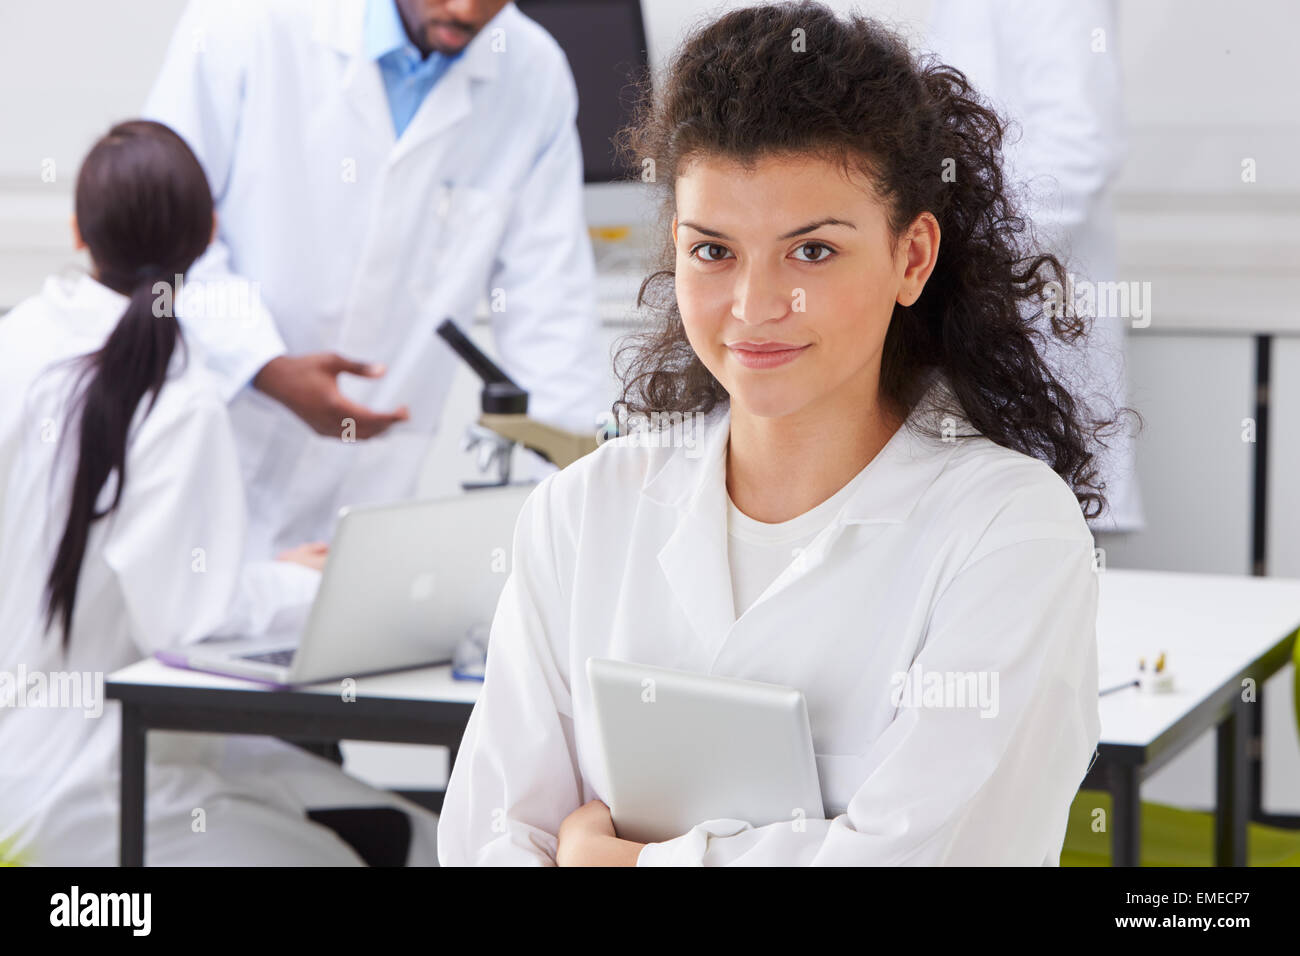 Portrait Of Technician In Laboratory With Colleagues Stock Photo